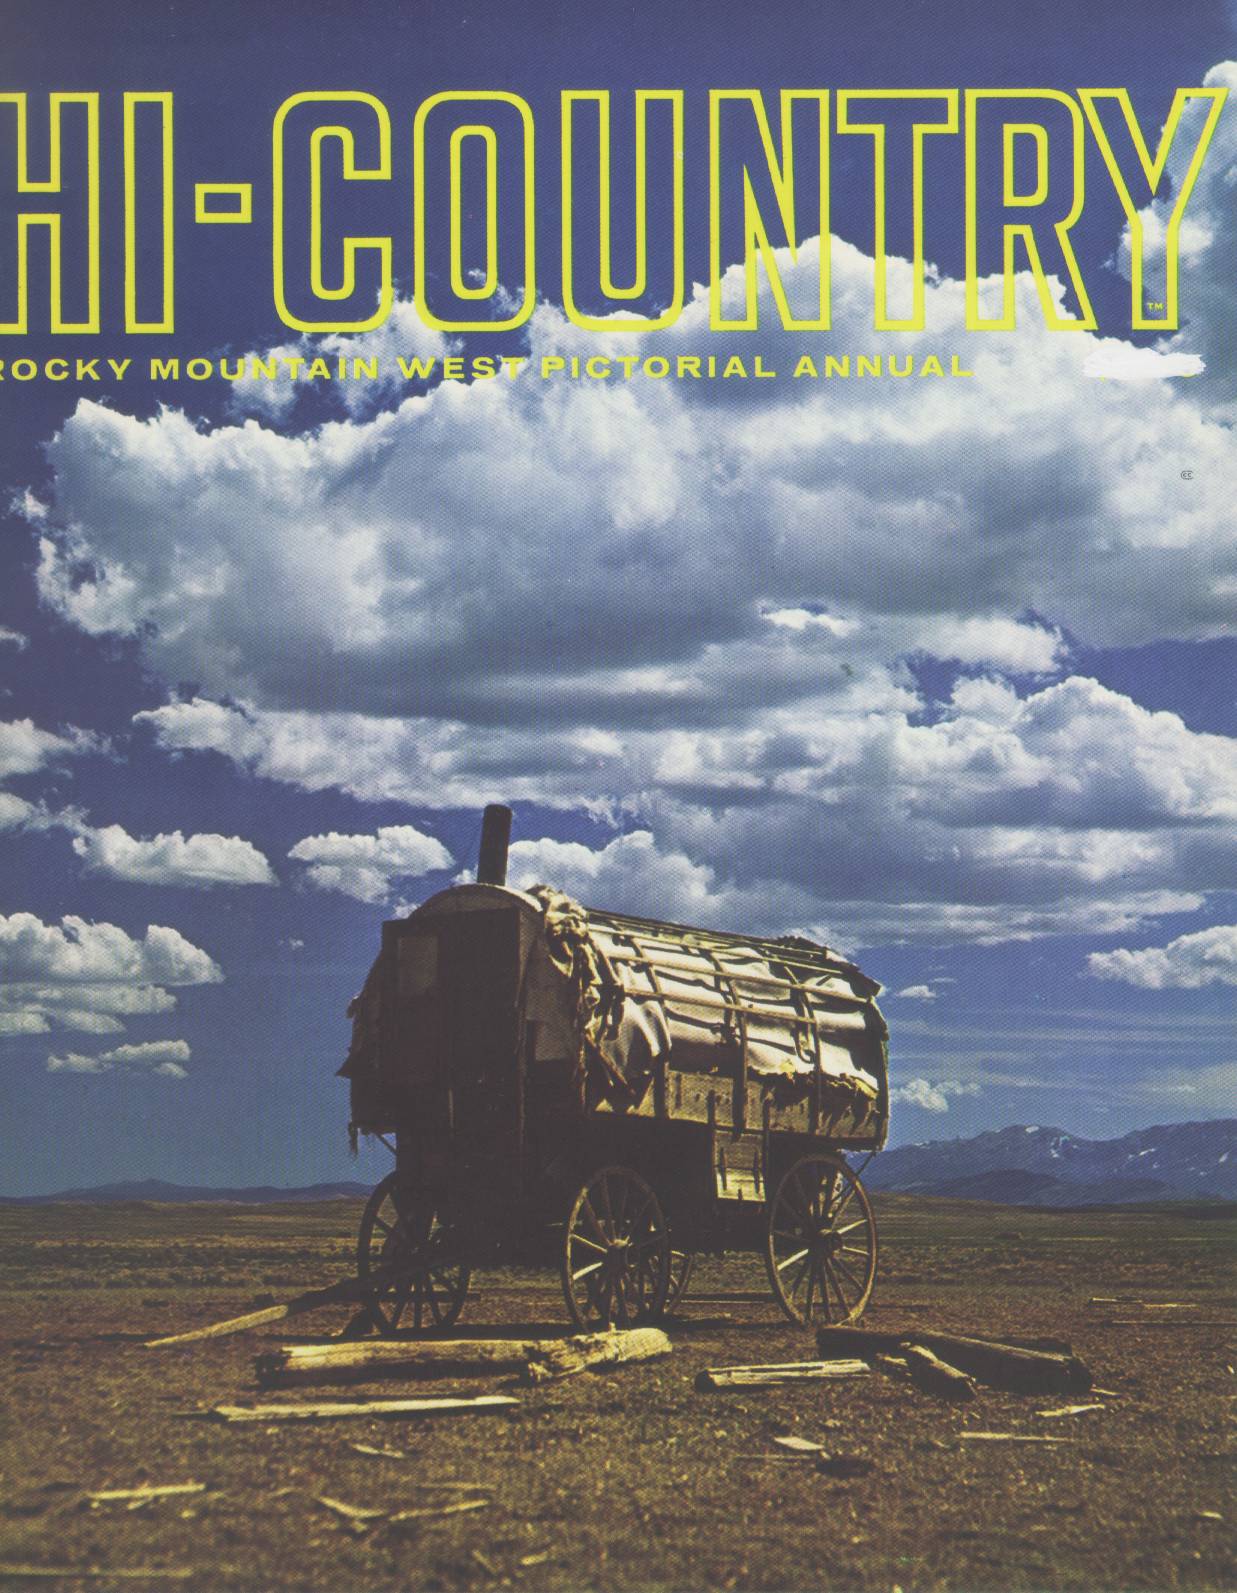 HI-COUNTRY: Rocky Mountain West Pictorial Annual. 